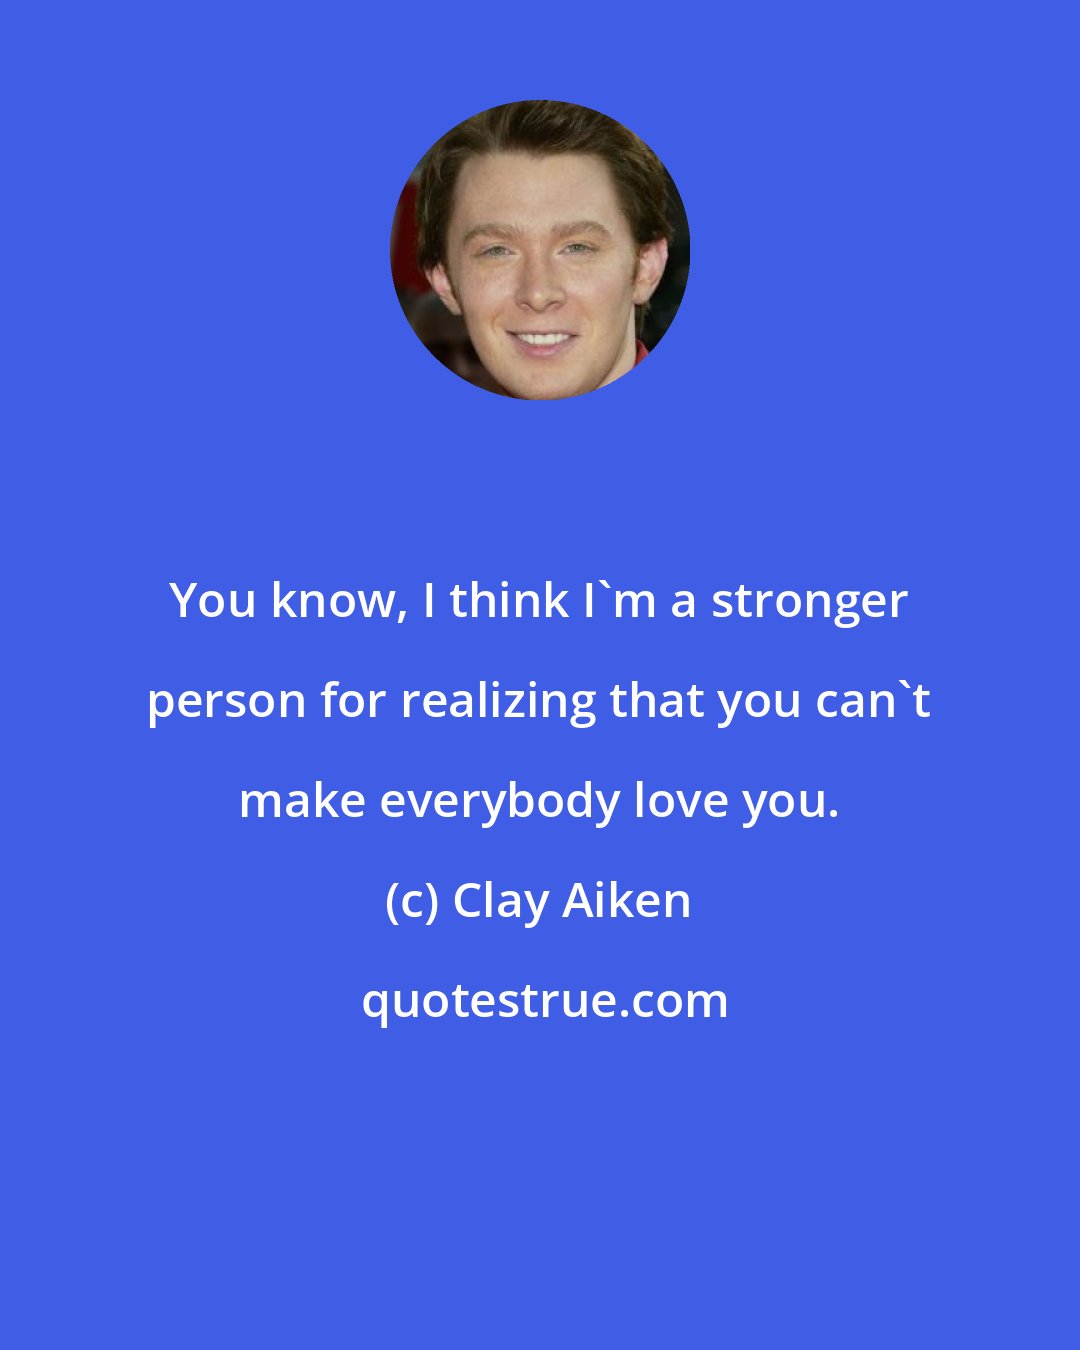 Clay Aiken: You know, I think I'm a stronger person for realizing that you can't make everybody love you.